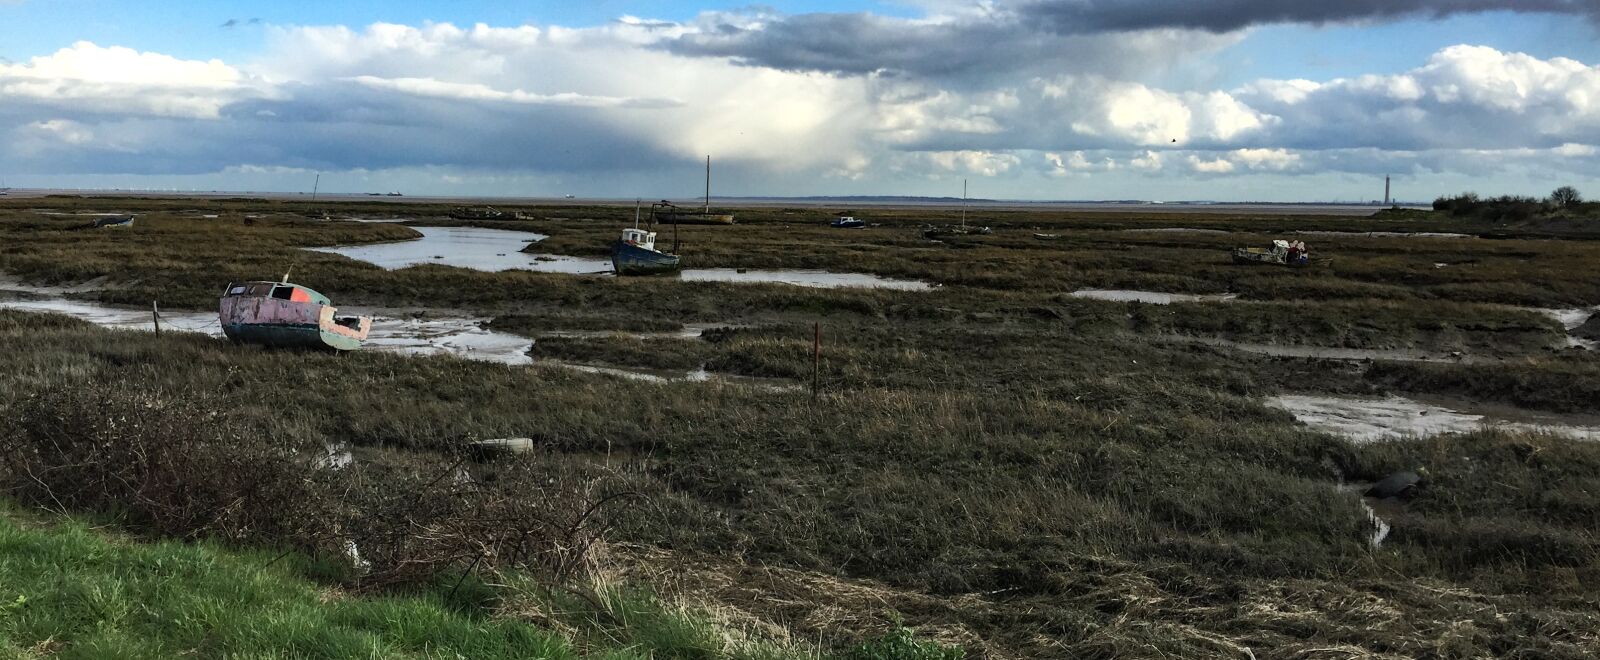 Apple iPhone 6 sample photo. Boats, leigh, sea, river photography